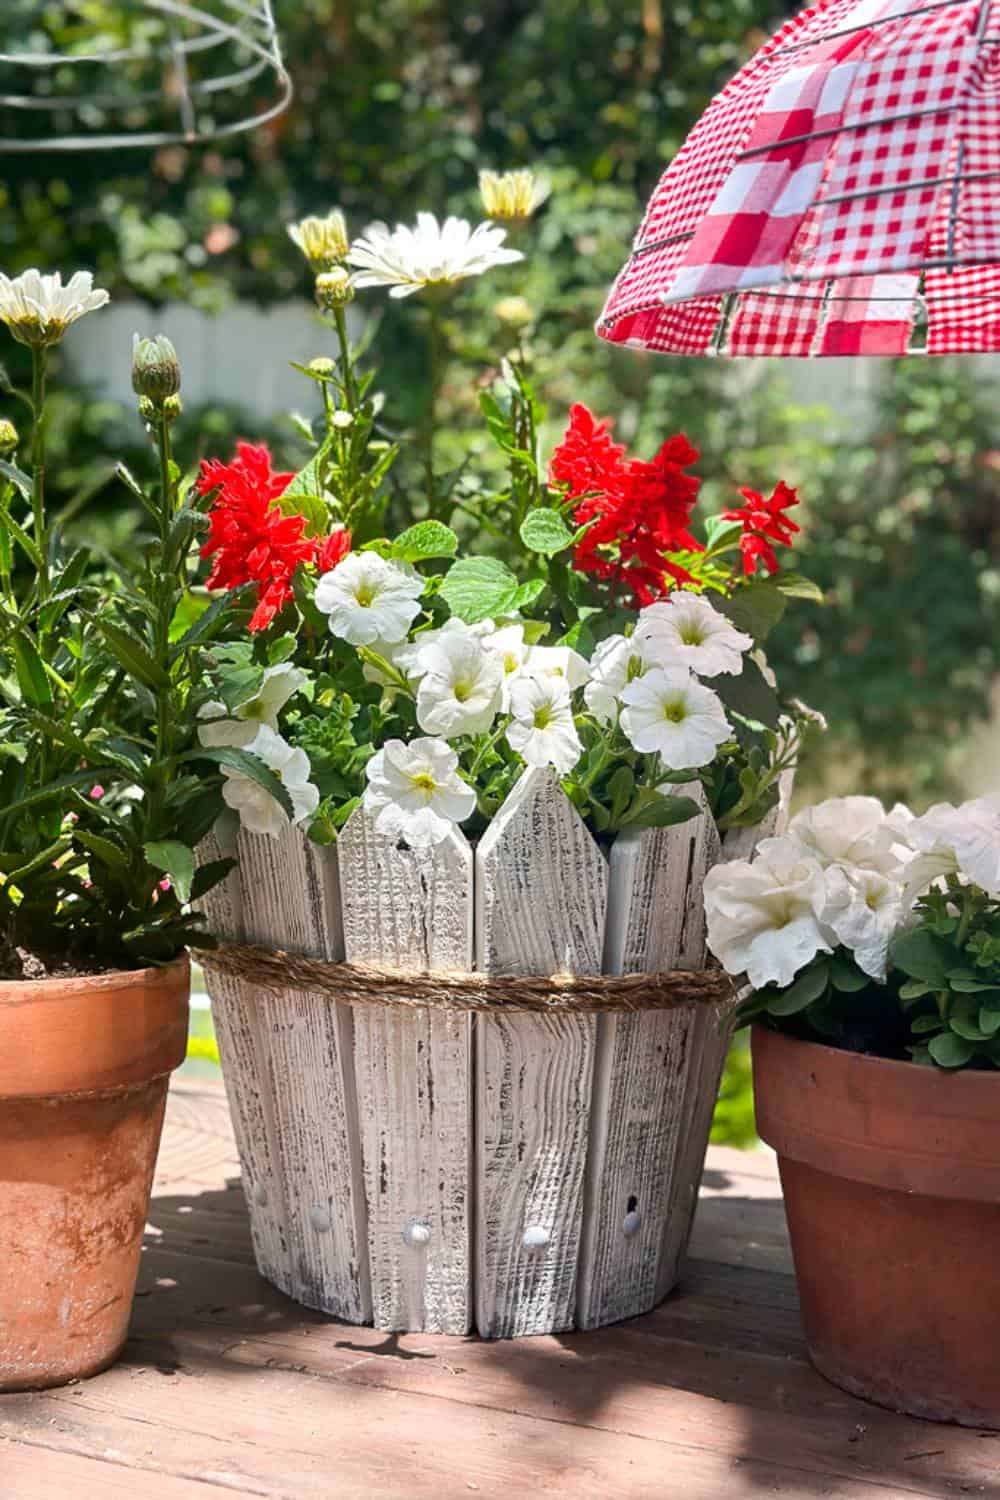 Petunias planted in a DIY picket fence flower pot.